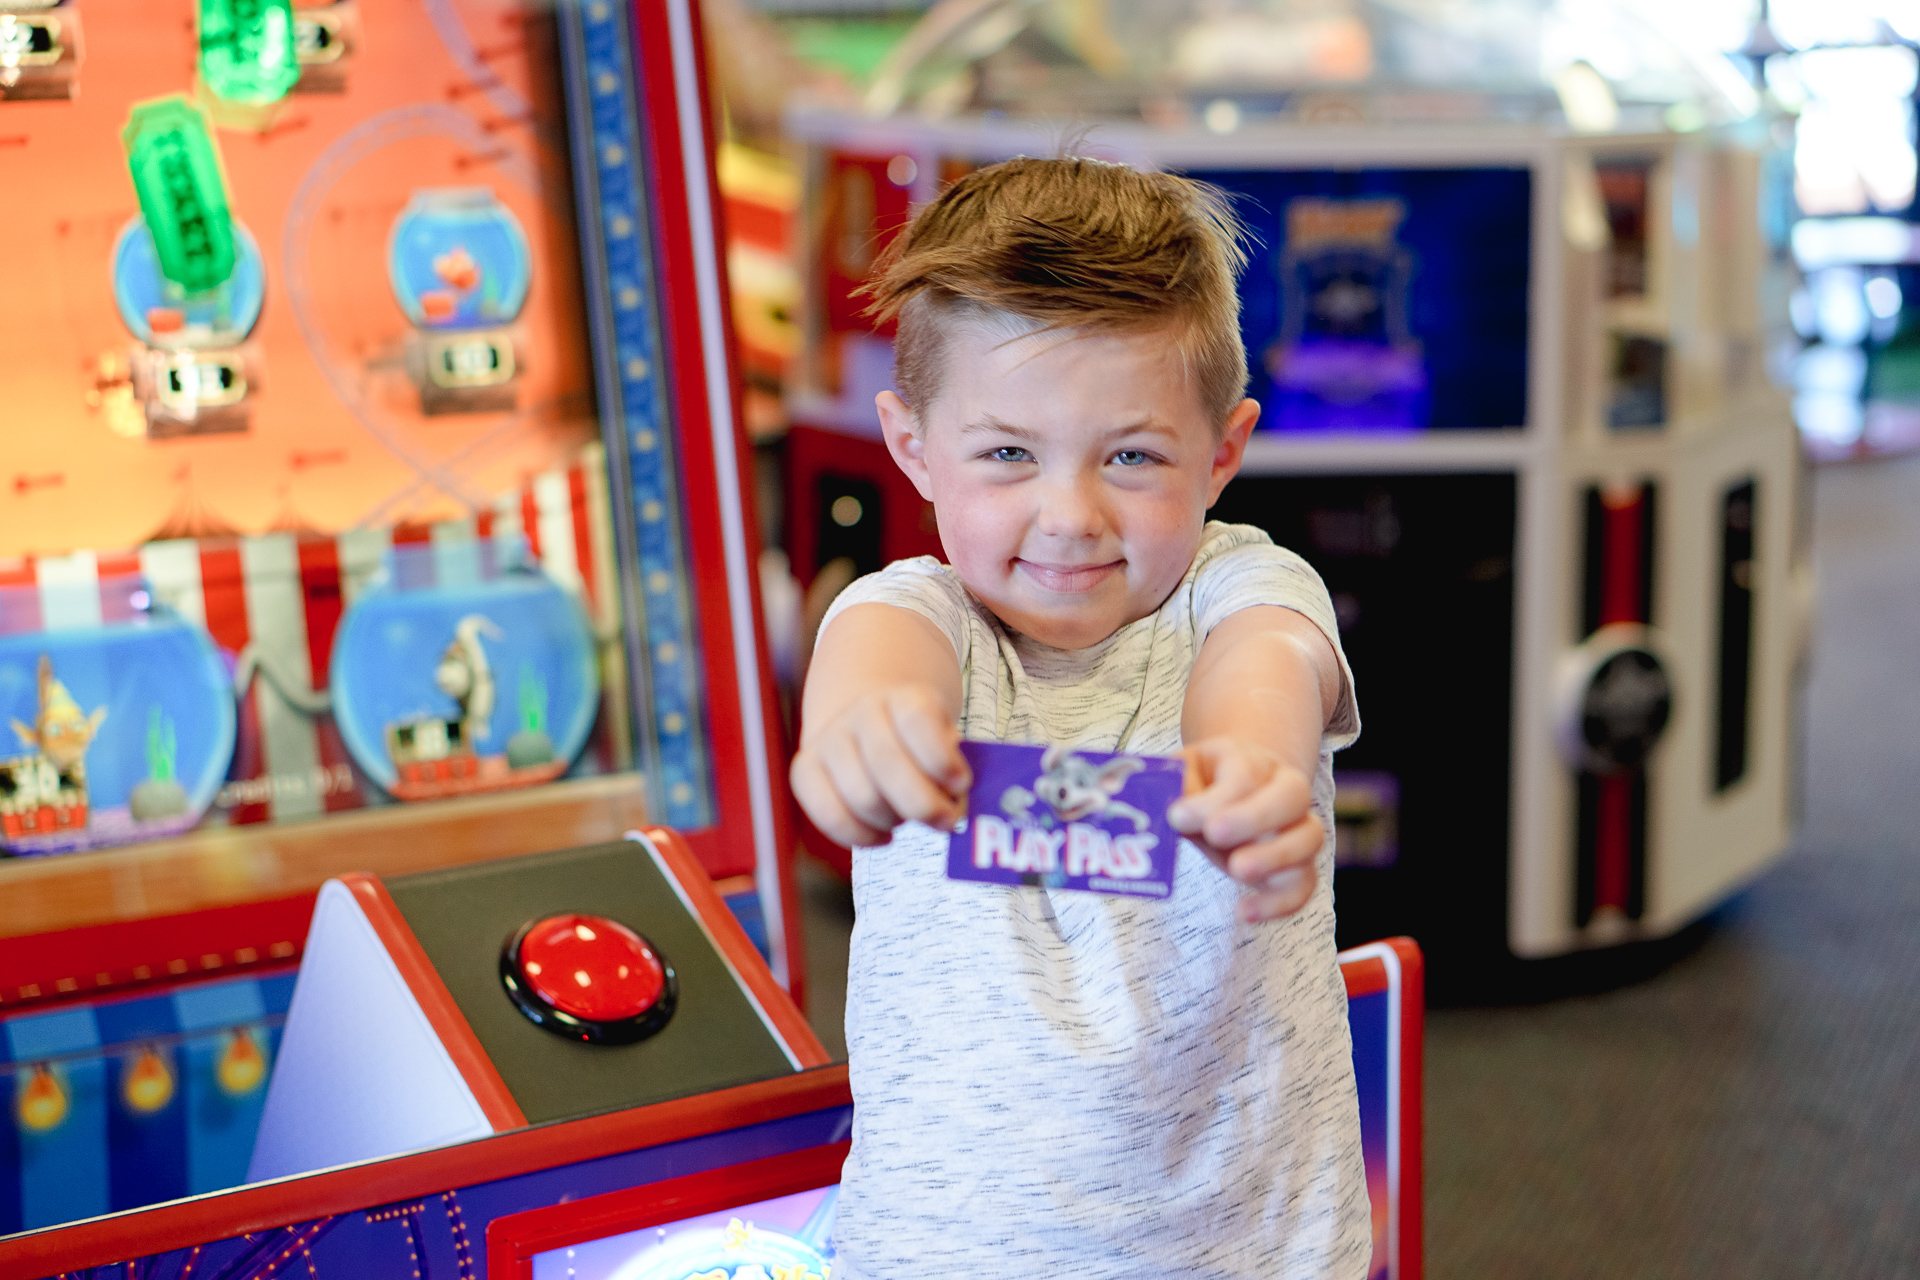 Chuck E Cheese Coupons and Rewards Program